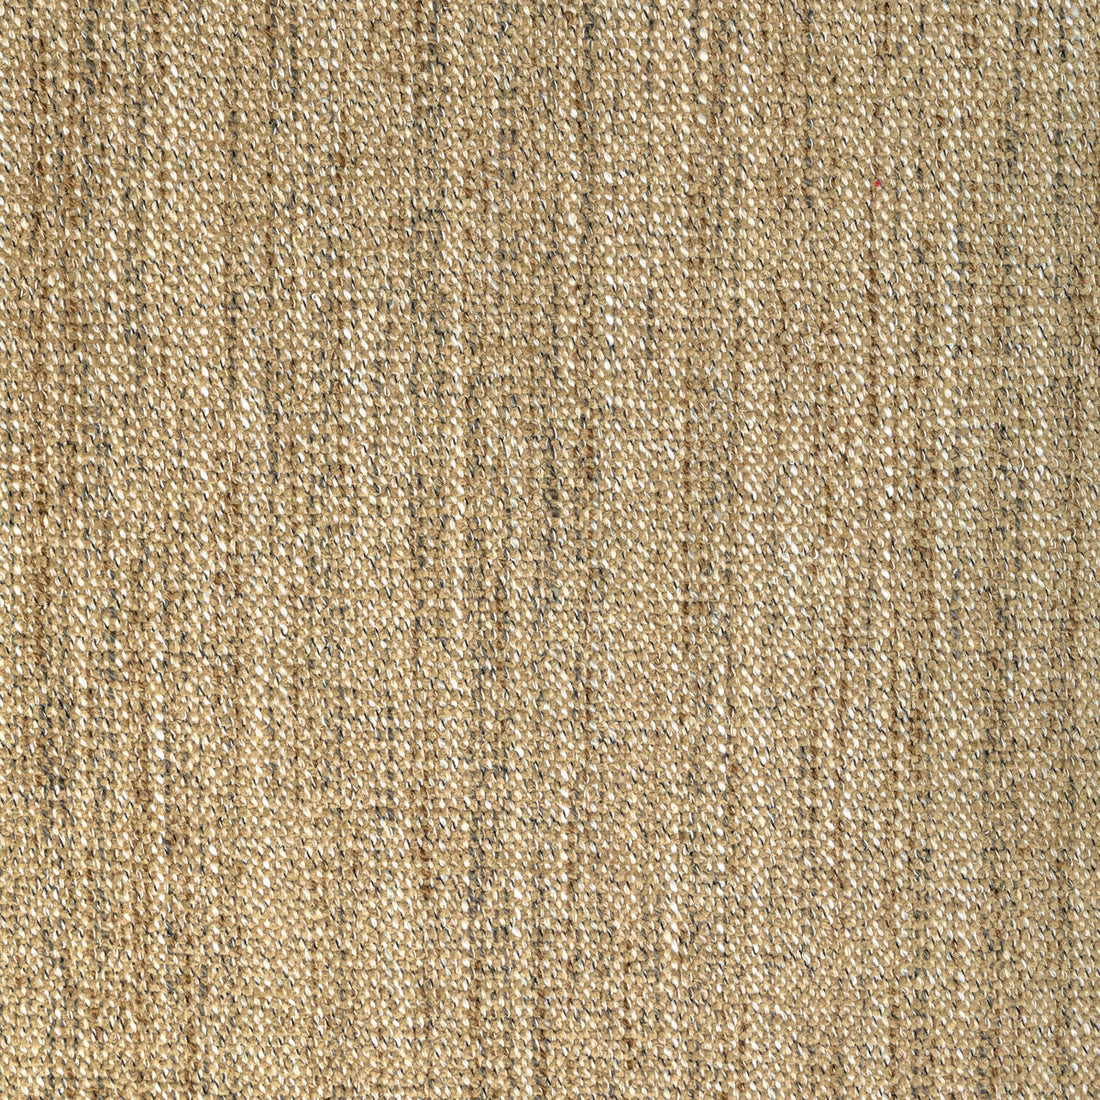 Delfino fabric in dune color - pattern 36748.16.0 - by Kravet Contract in the Refined Textures Performance Crypton collection